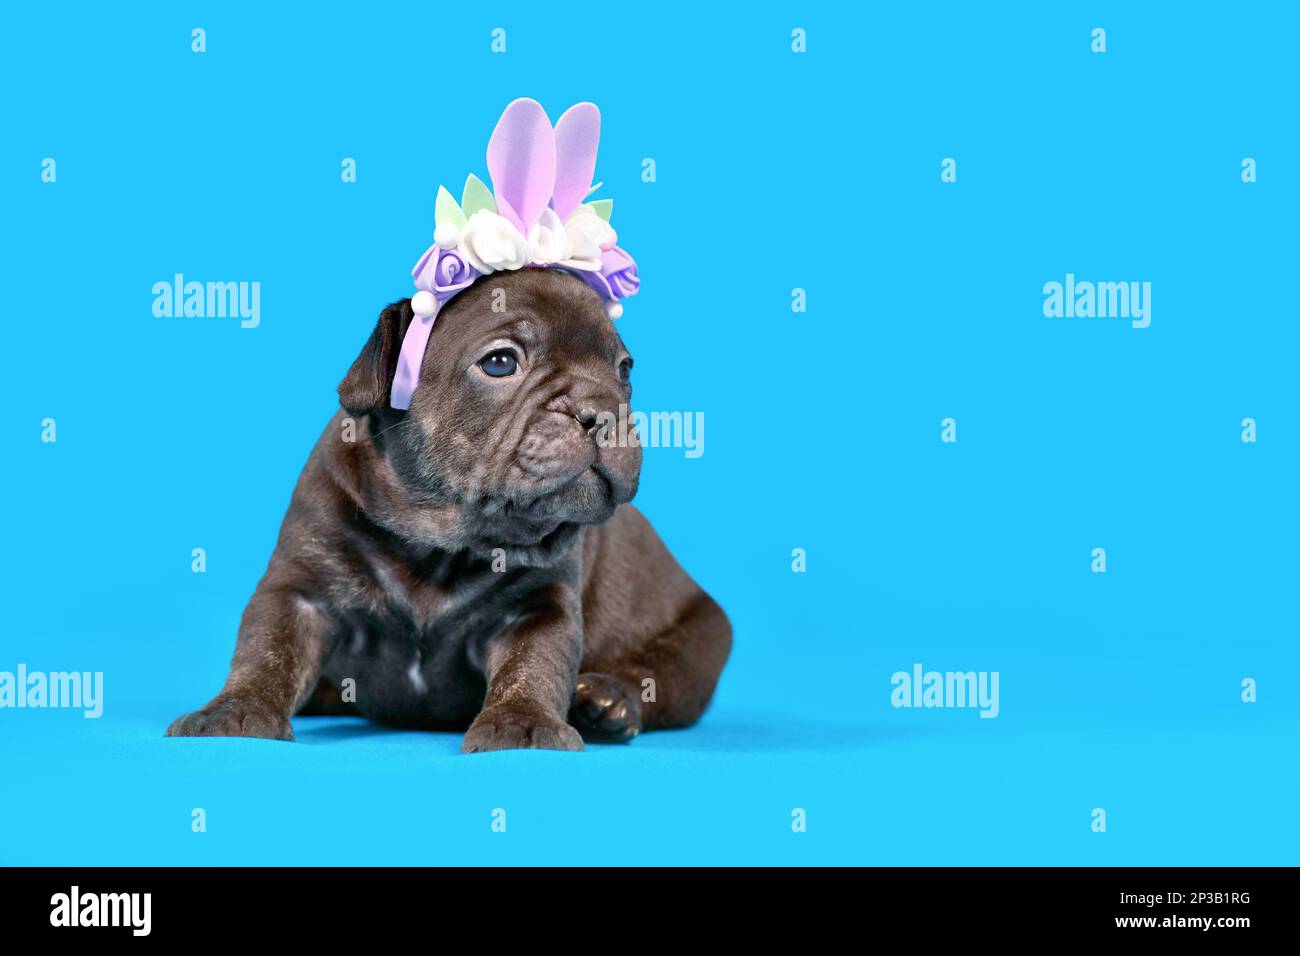 Black French Bulldog dog puppy dressed up as Easter bunny with rabbit ears headband with flowers on blue background Stock Photo